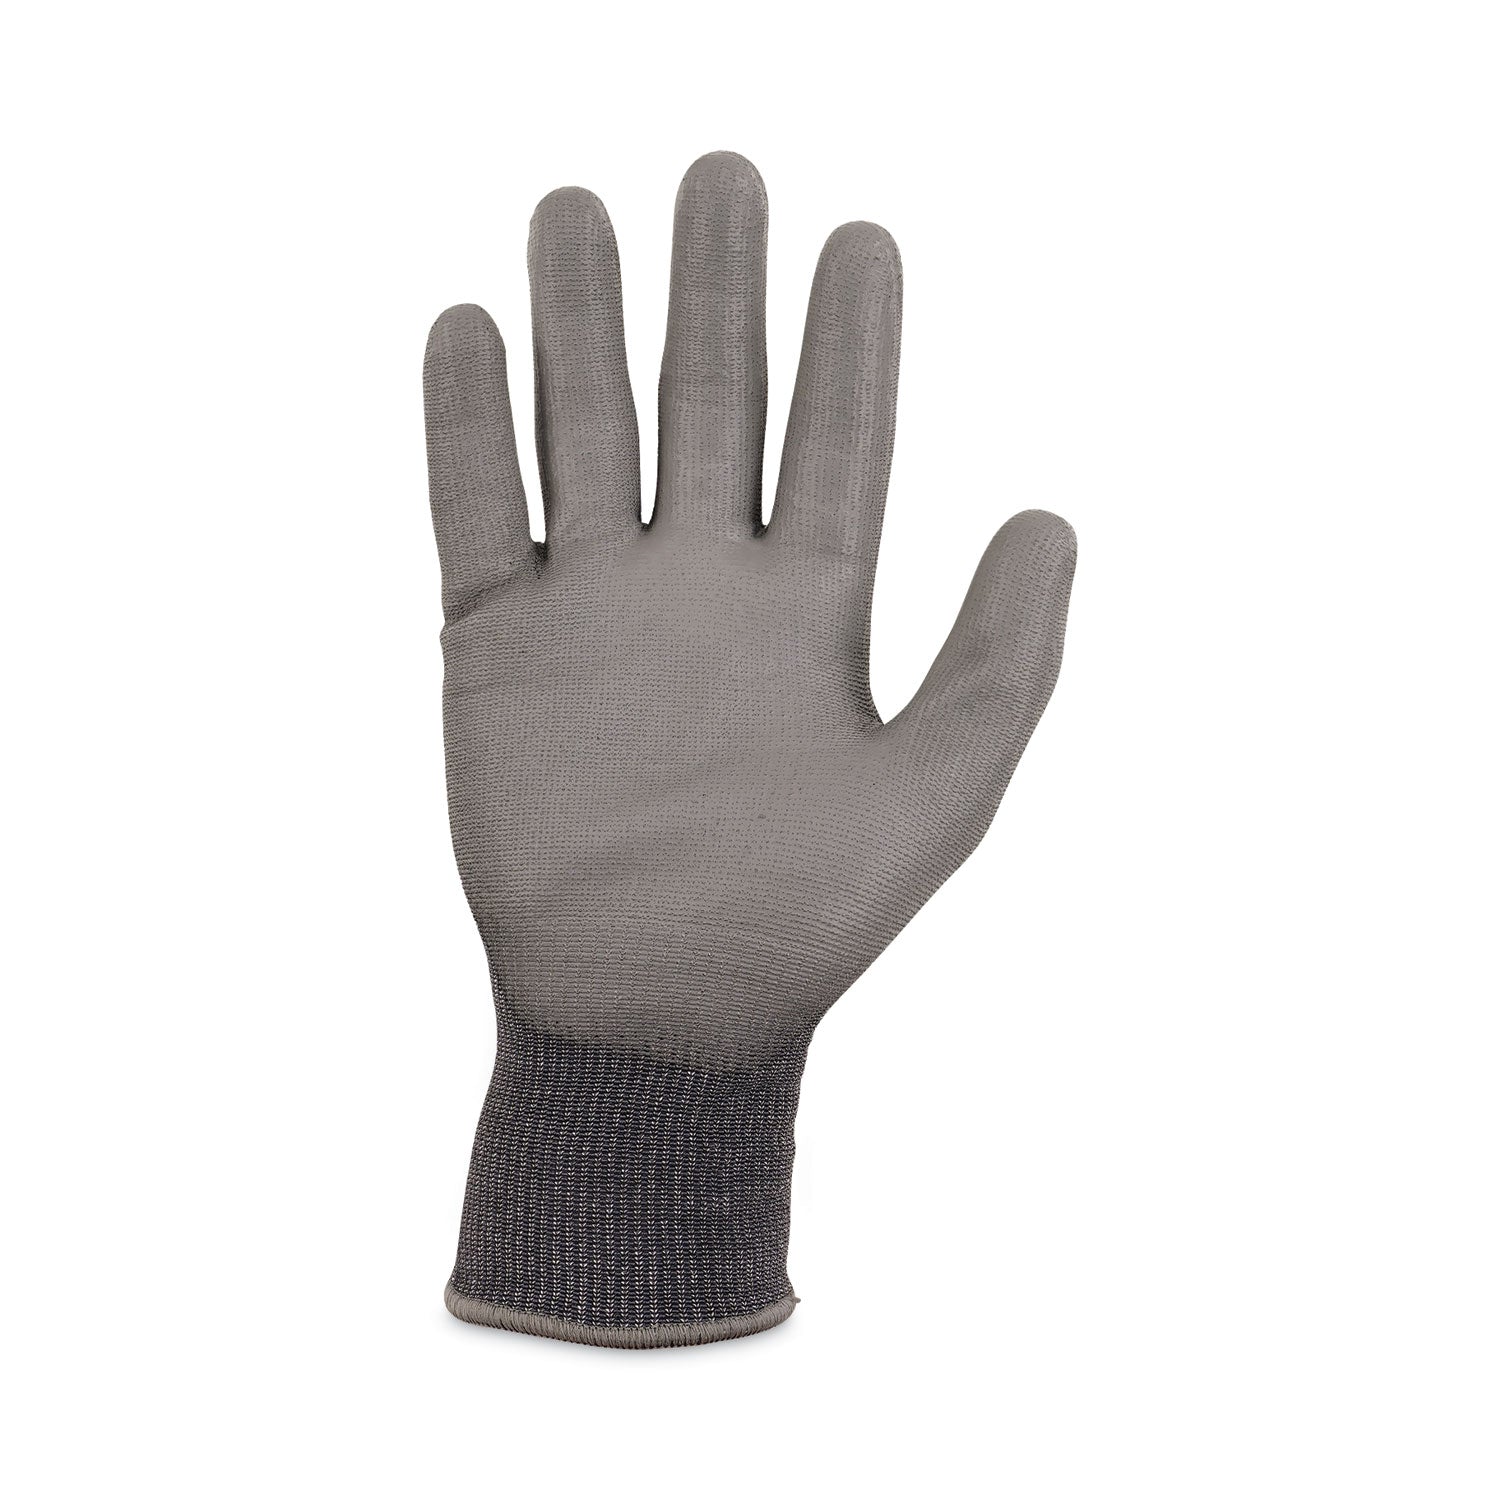 proflex-7044-ansi-a4-pu-coated-cr-gloves-gray-large-12-pairs-pack-ships-in-1-3-business-days_ego10484 - 2